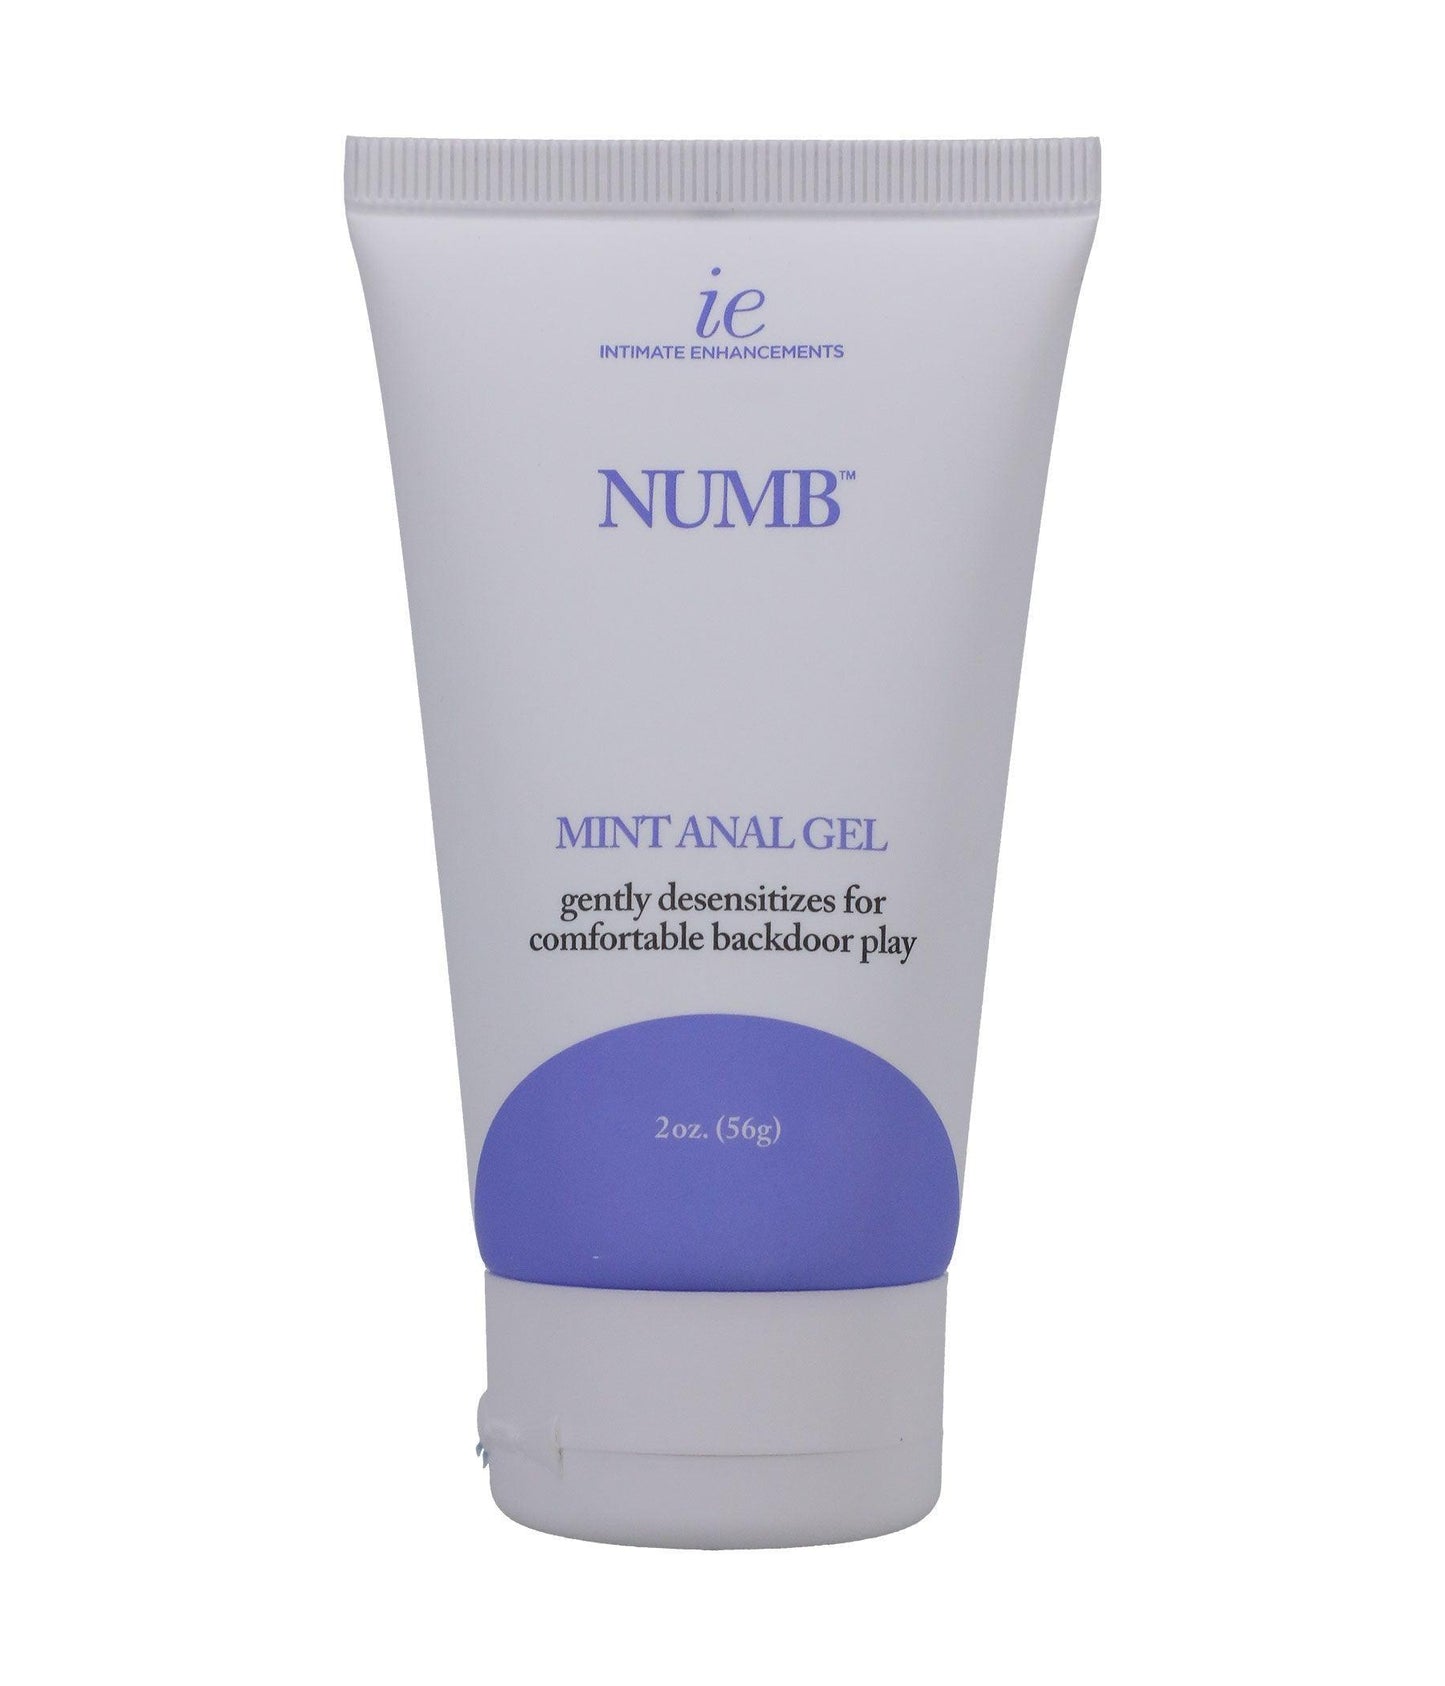 Intimate Enhancements Numb - Mint Anal Gel - 2 Oz. - Boxed - My Sex Toy Hub